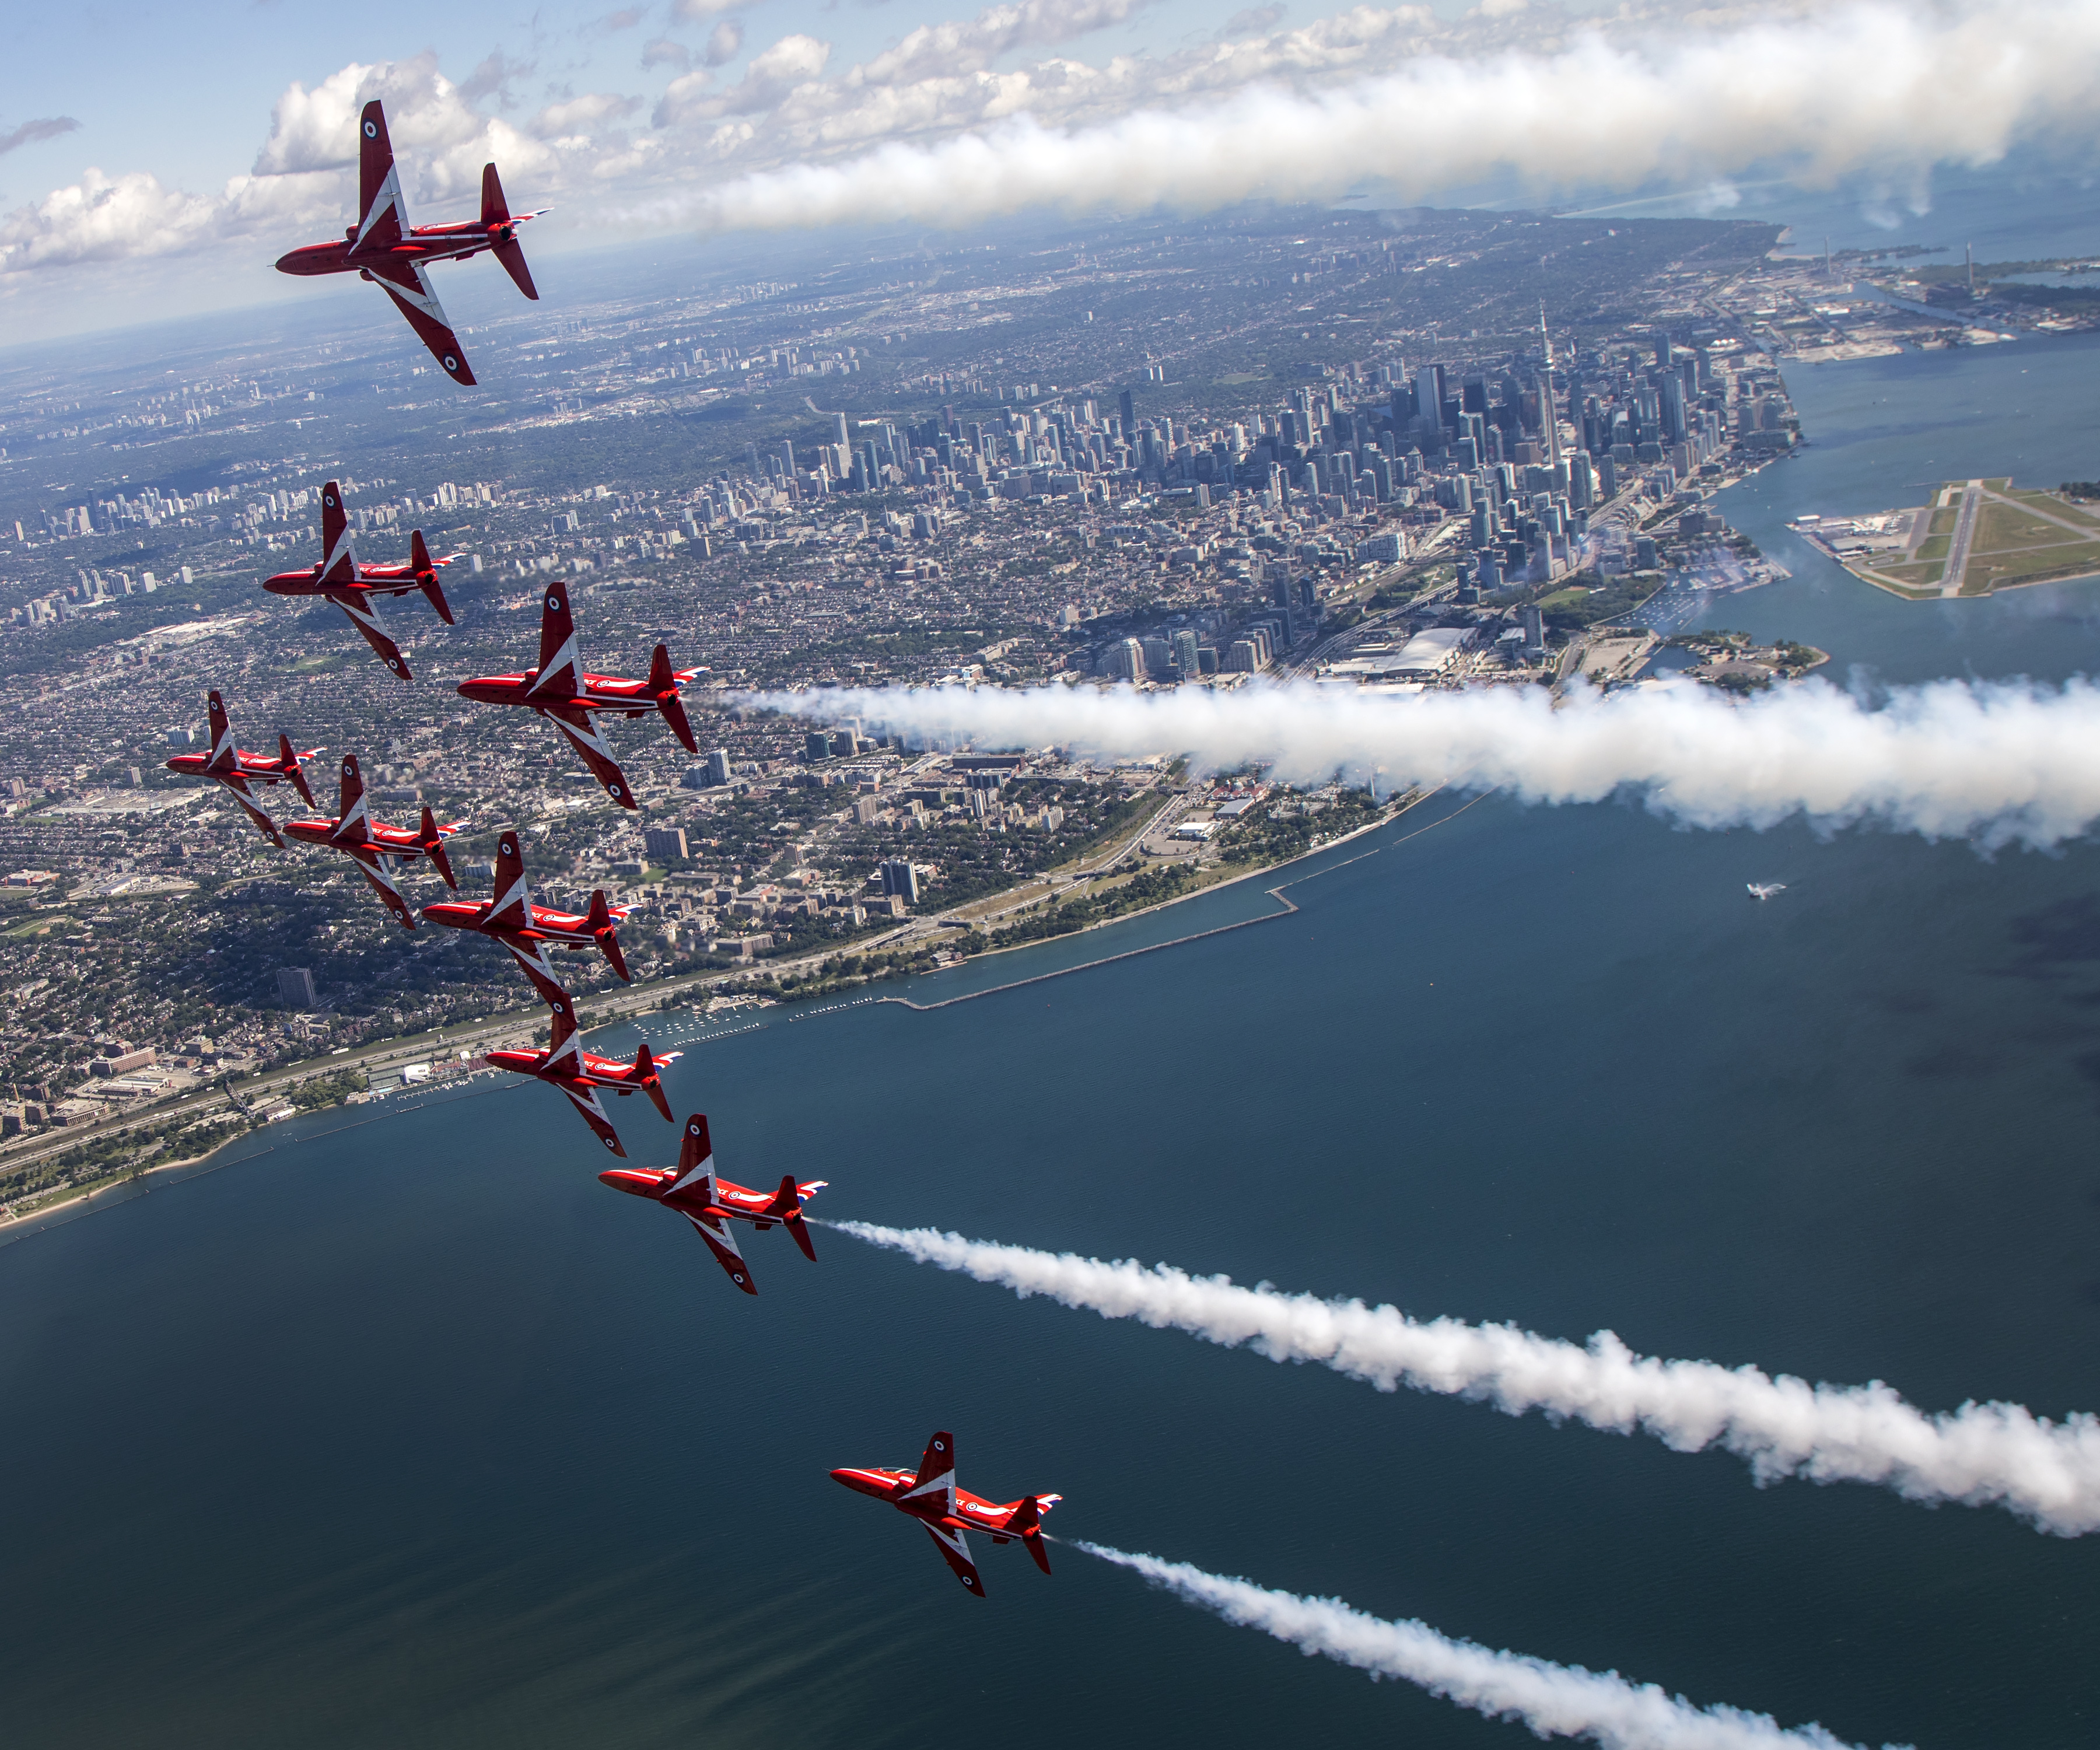 One of the roles of the Red Arrows is to support a range of UK interests overseas. 